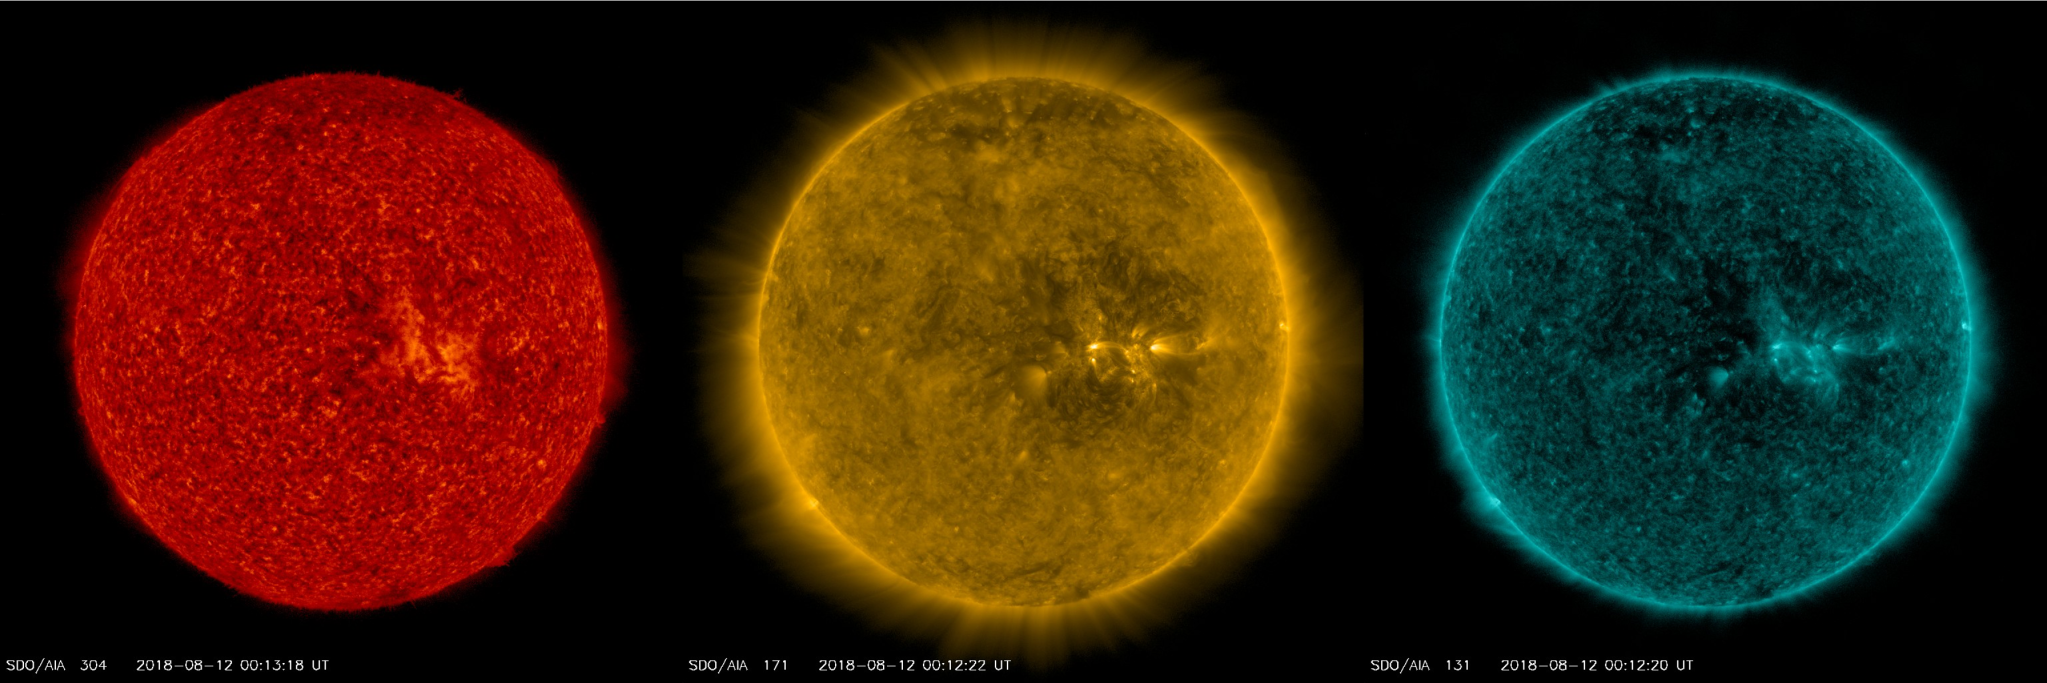 Three satellite images of the Sun show it glowing (from left to right) in red, gold, and aqua.